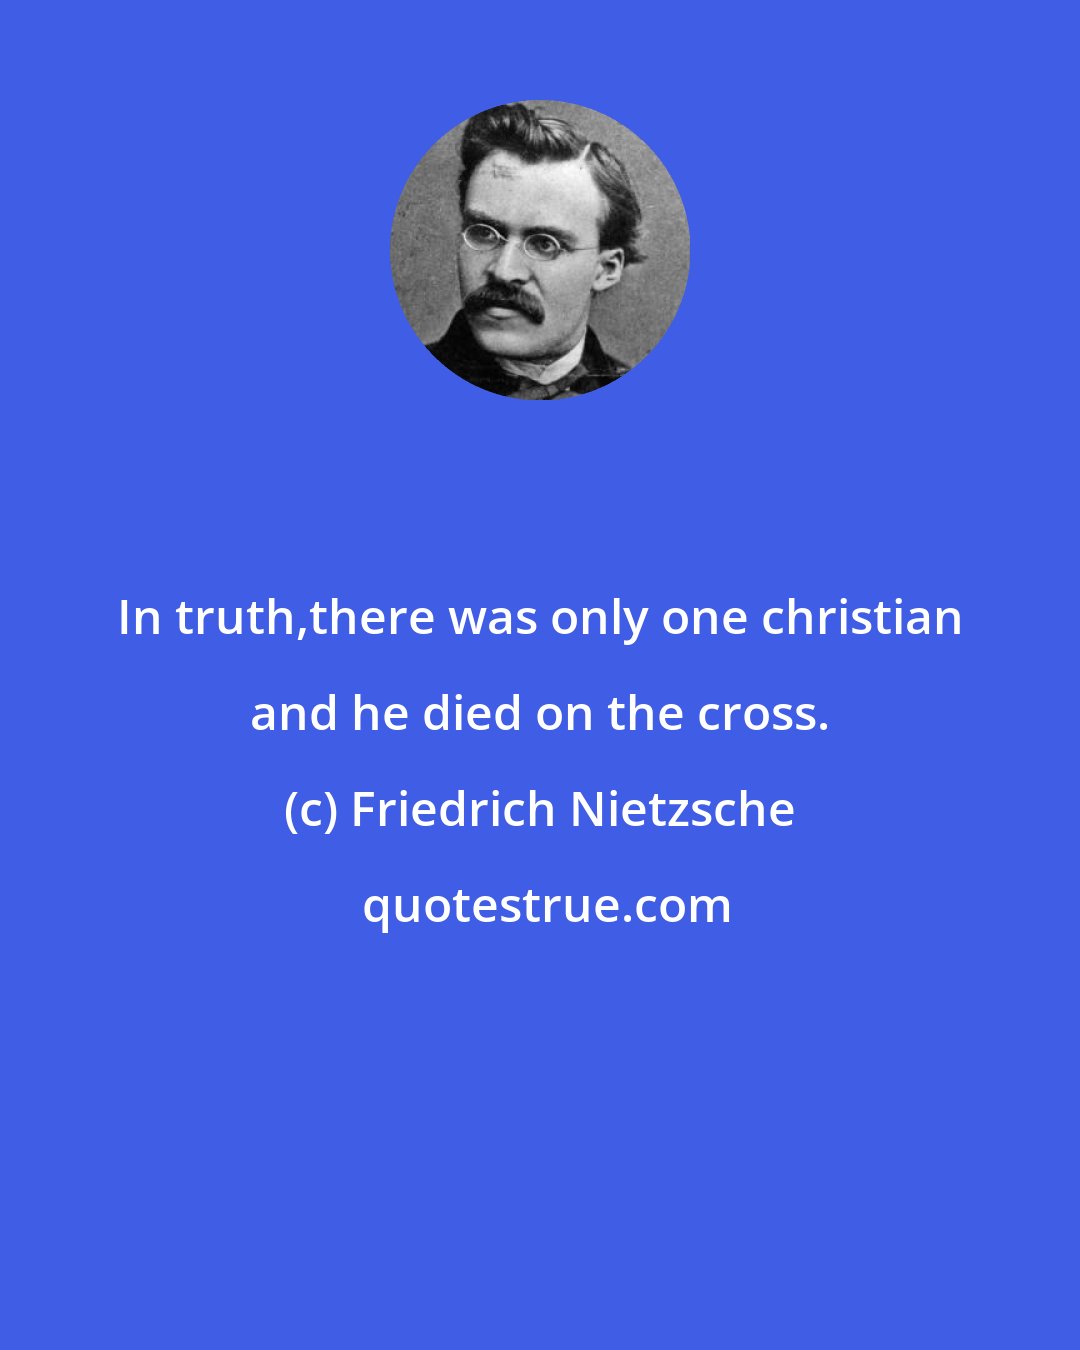 Friedrich Nietzsche: In truth,there was only one christian and he died on the cross.